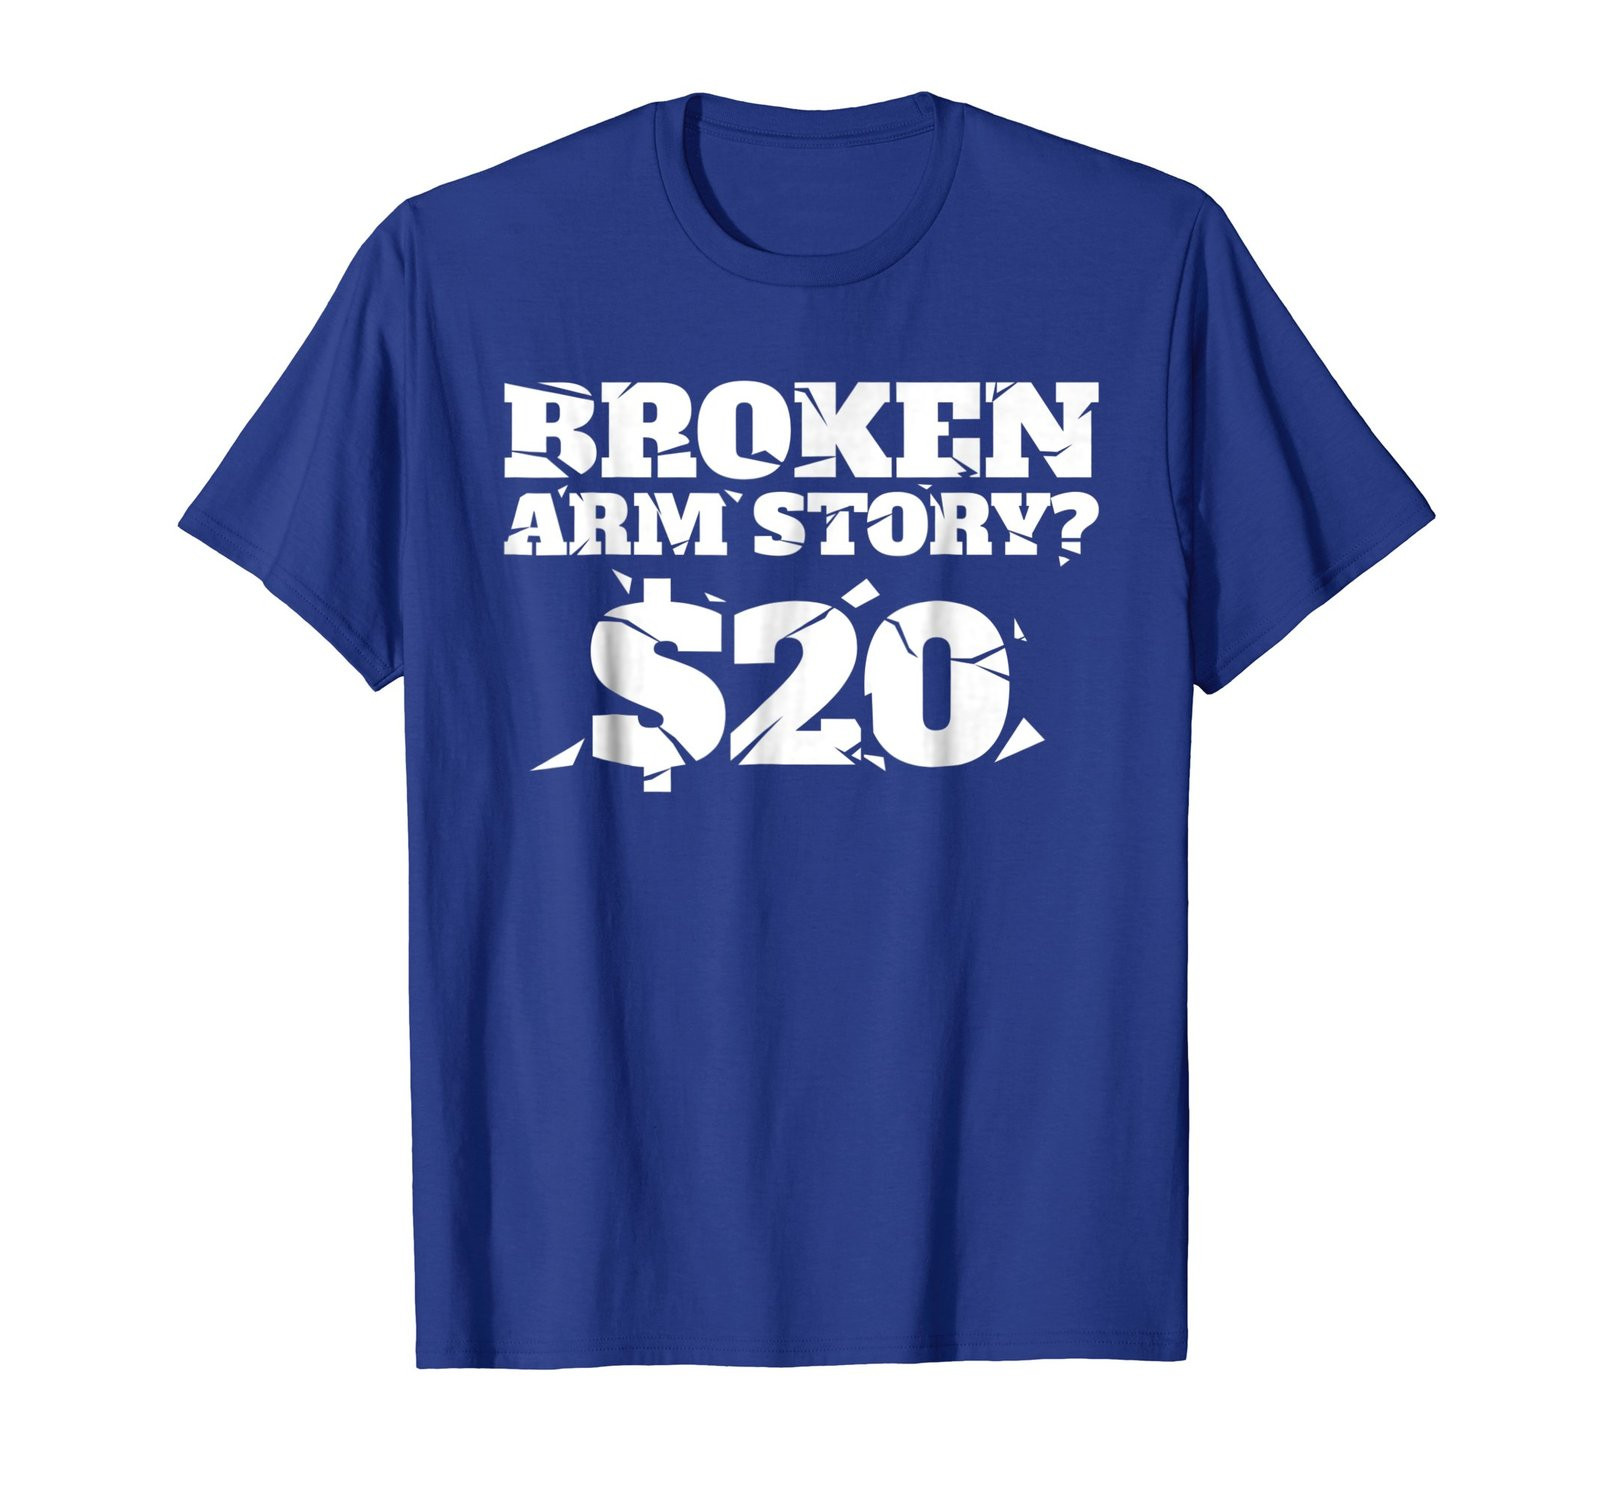 Get Well Gifts For Kids With Broken Arm
 Funny Shirts Broken Arm Story Get Well Injury Recovery